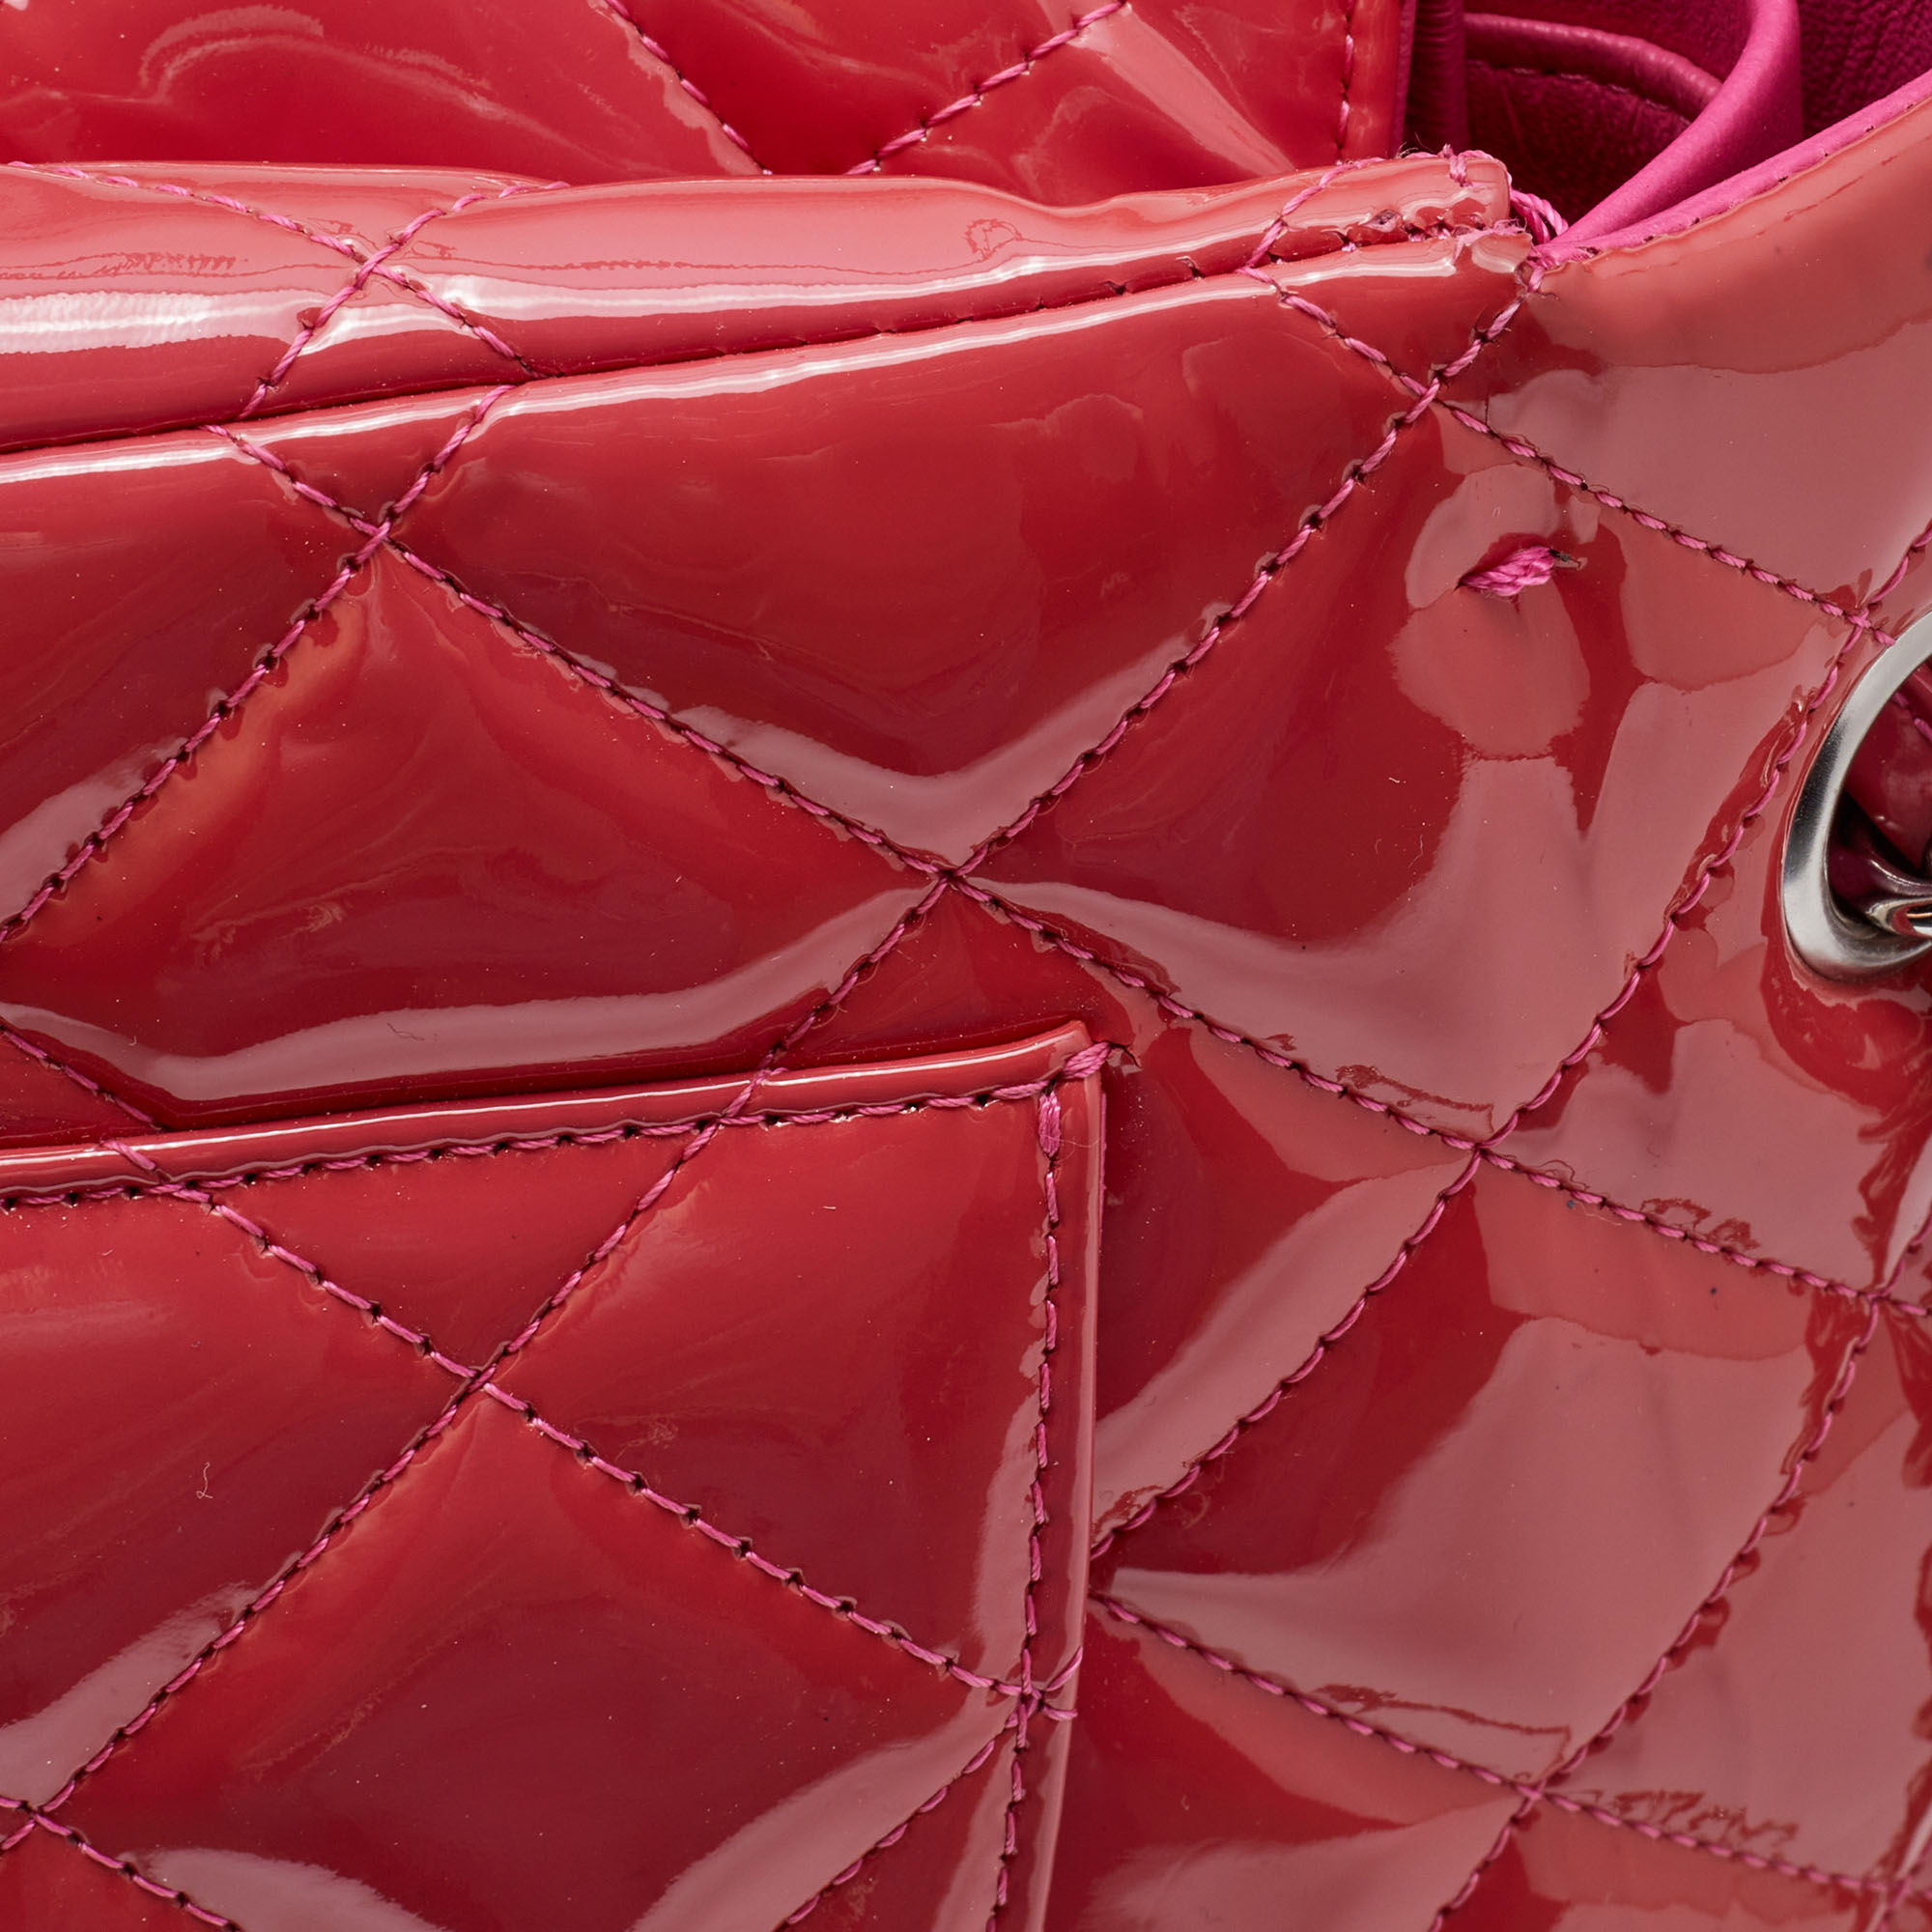 Chanel Pink Quilted Patent Leather Maxi Classic Double Flap Bag